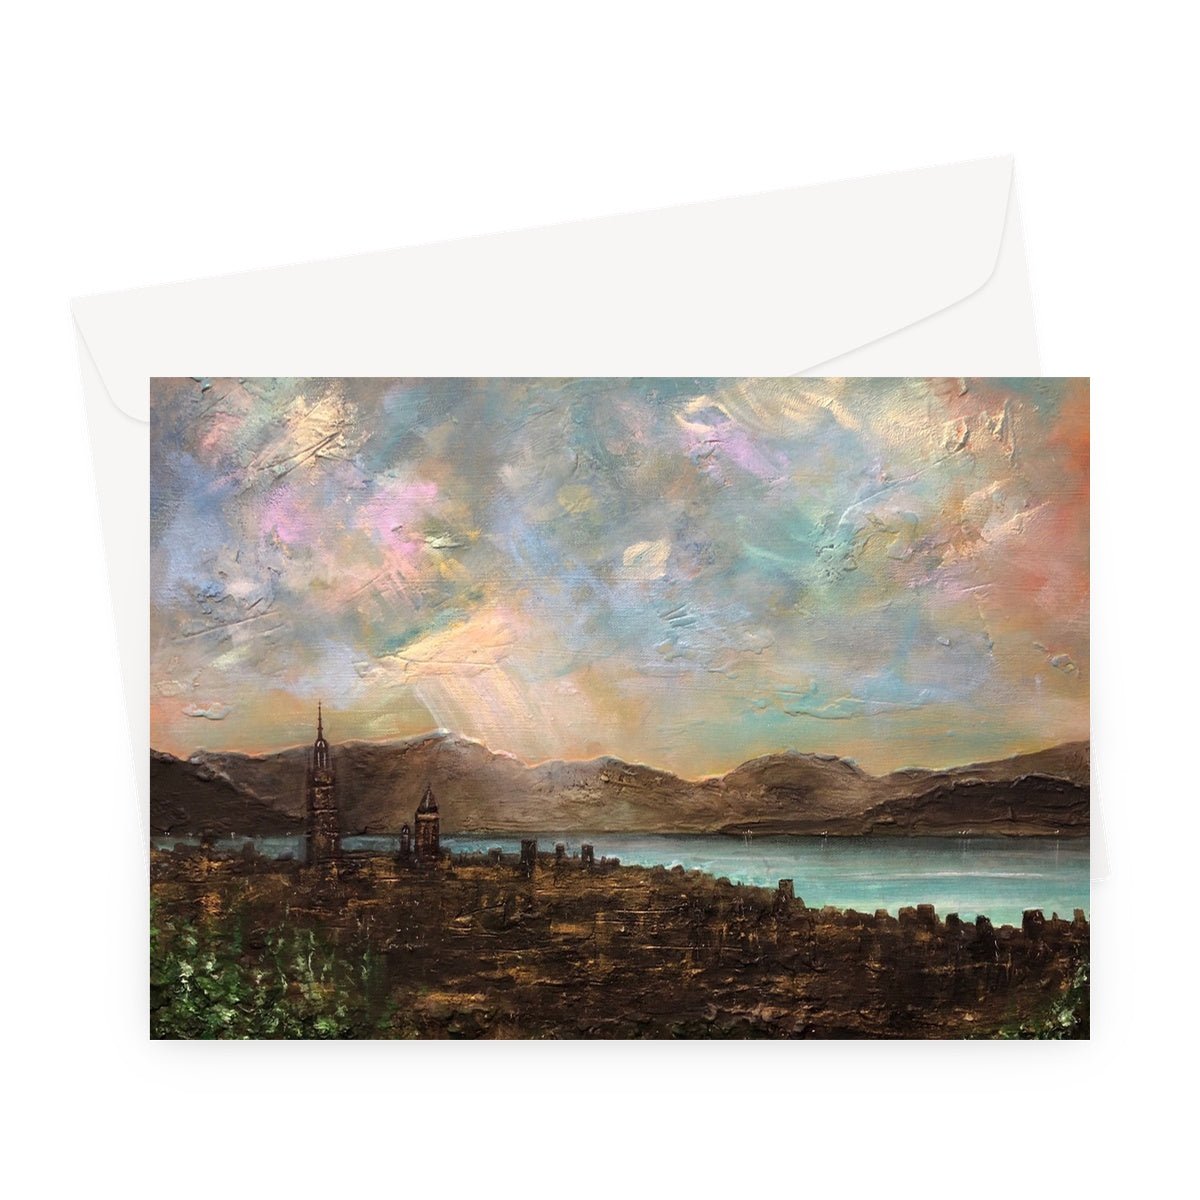 Angels Fingers Over Greenock Art Gifts Greeting Card-Greetings Cards-River Clyde Art Gallery-A5 Landscape-1 Card-Paintings, Prints, Homeware, Art Gifts From Scotland By Scottish Artist Kevin Hunter